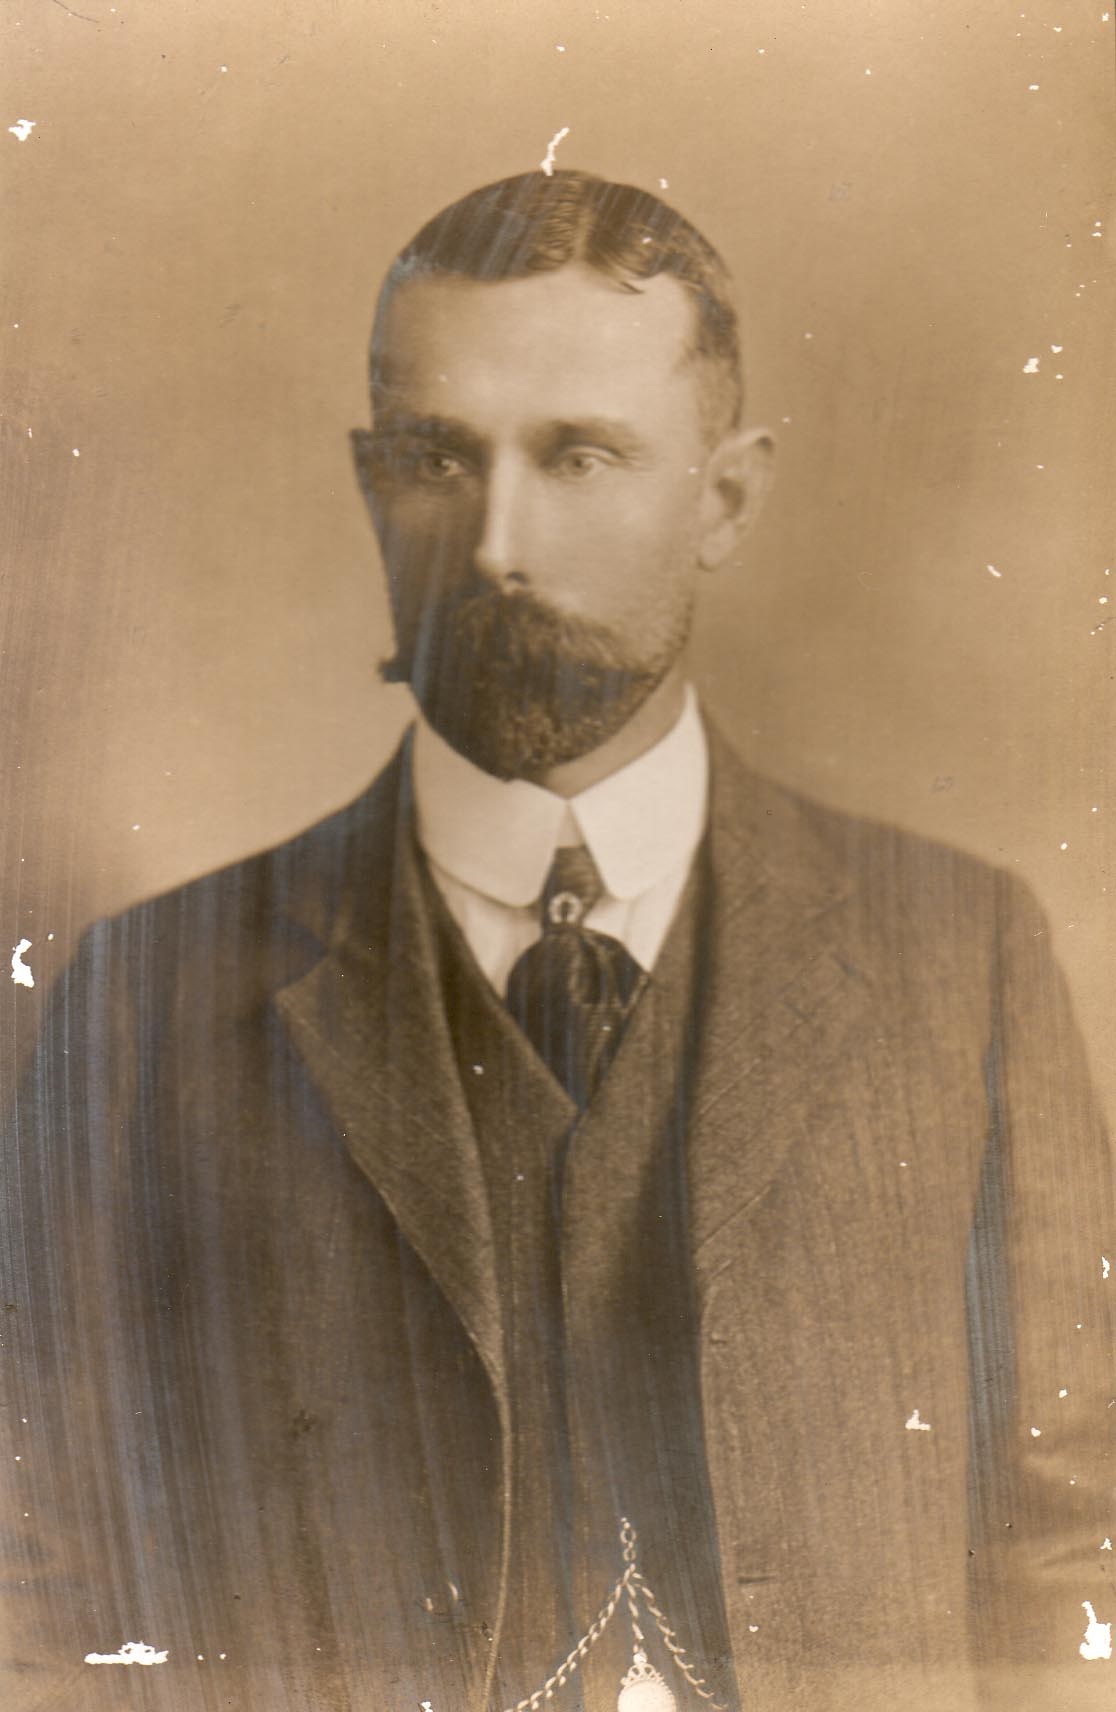 A portrait of Fred Moore from the 1900s